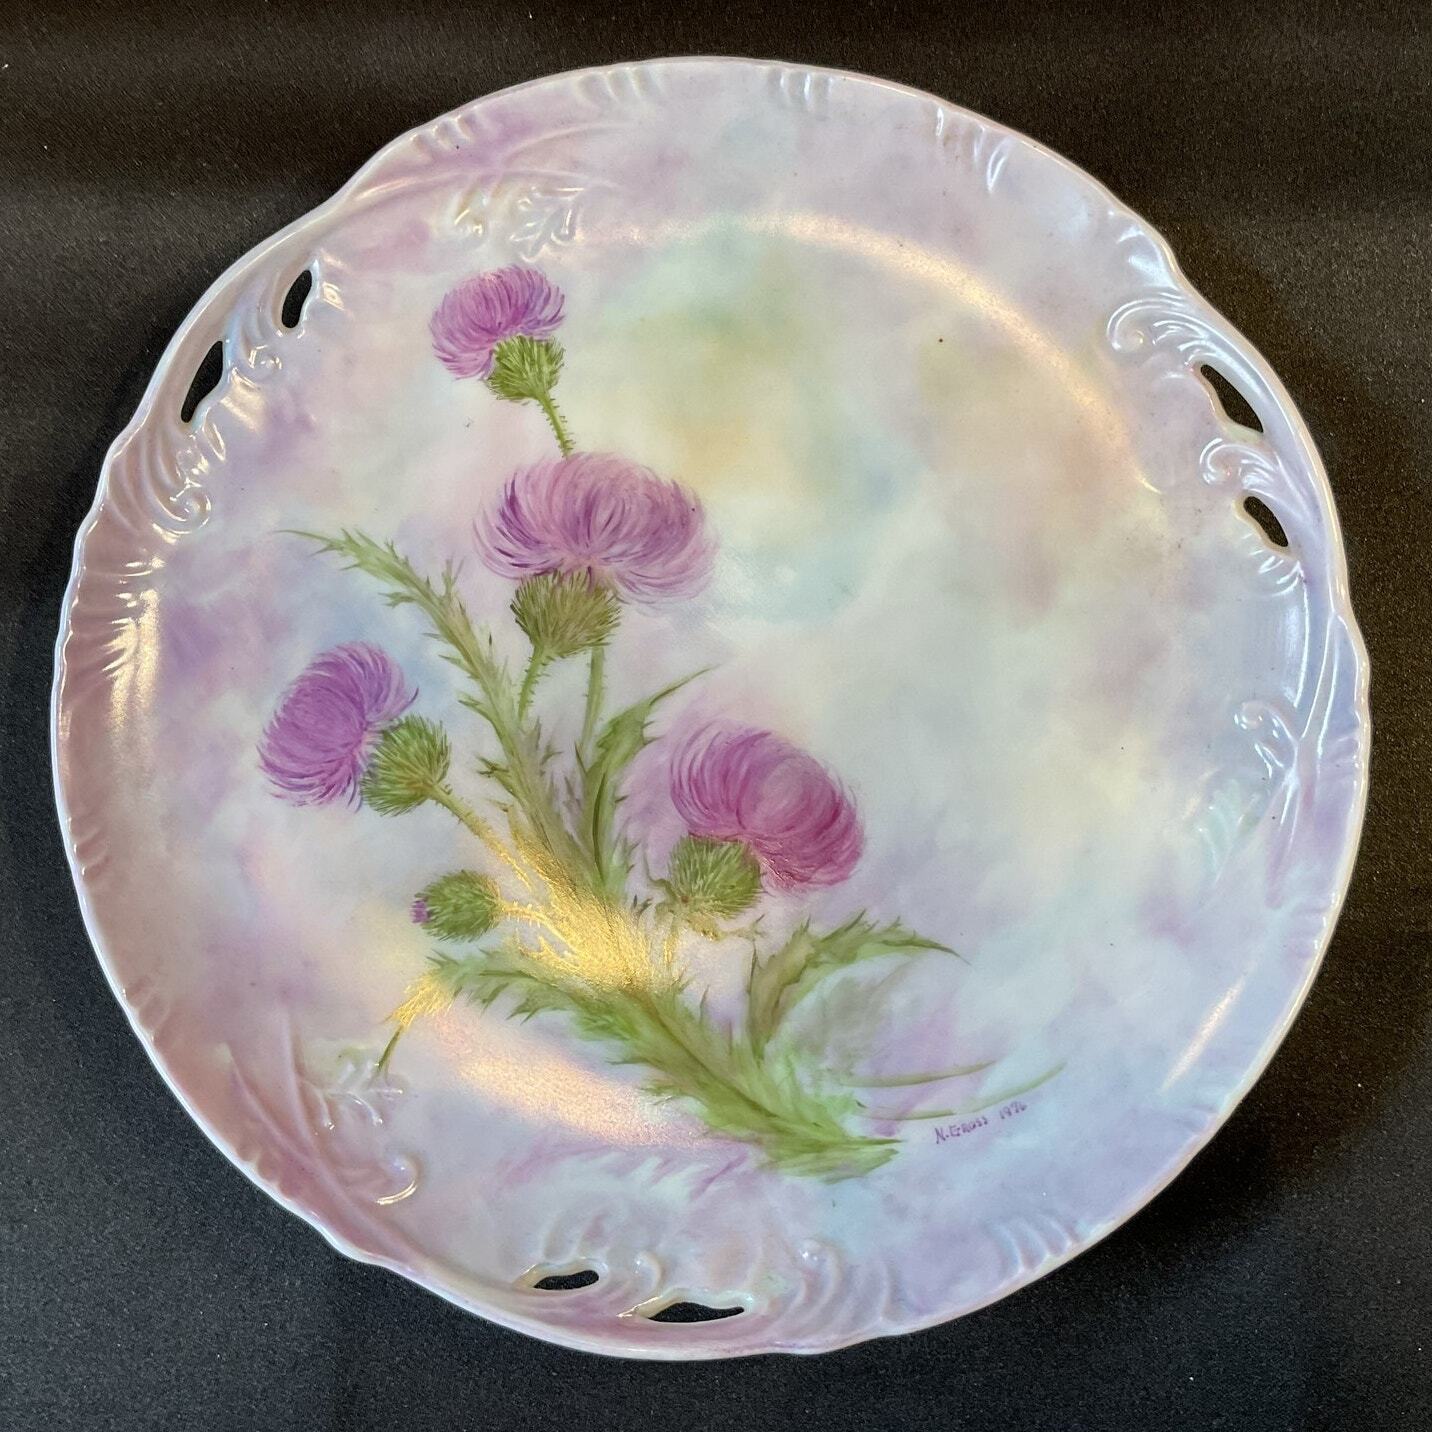 Vintage Hand-Painted Reticulated Plate Purple Floral Thistle Signed N Gross 1976